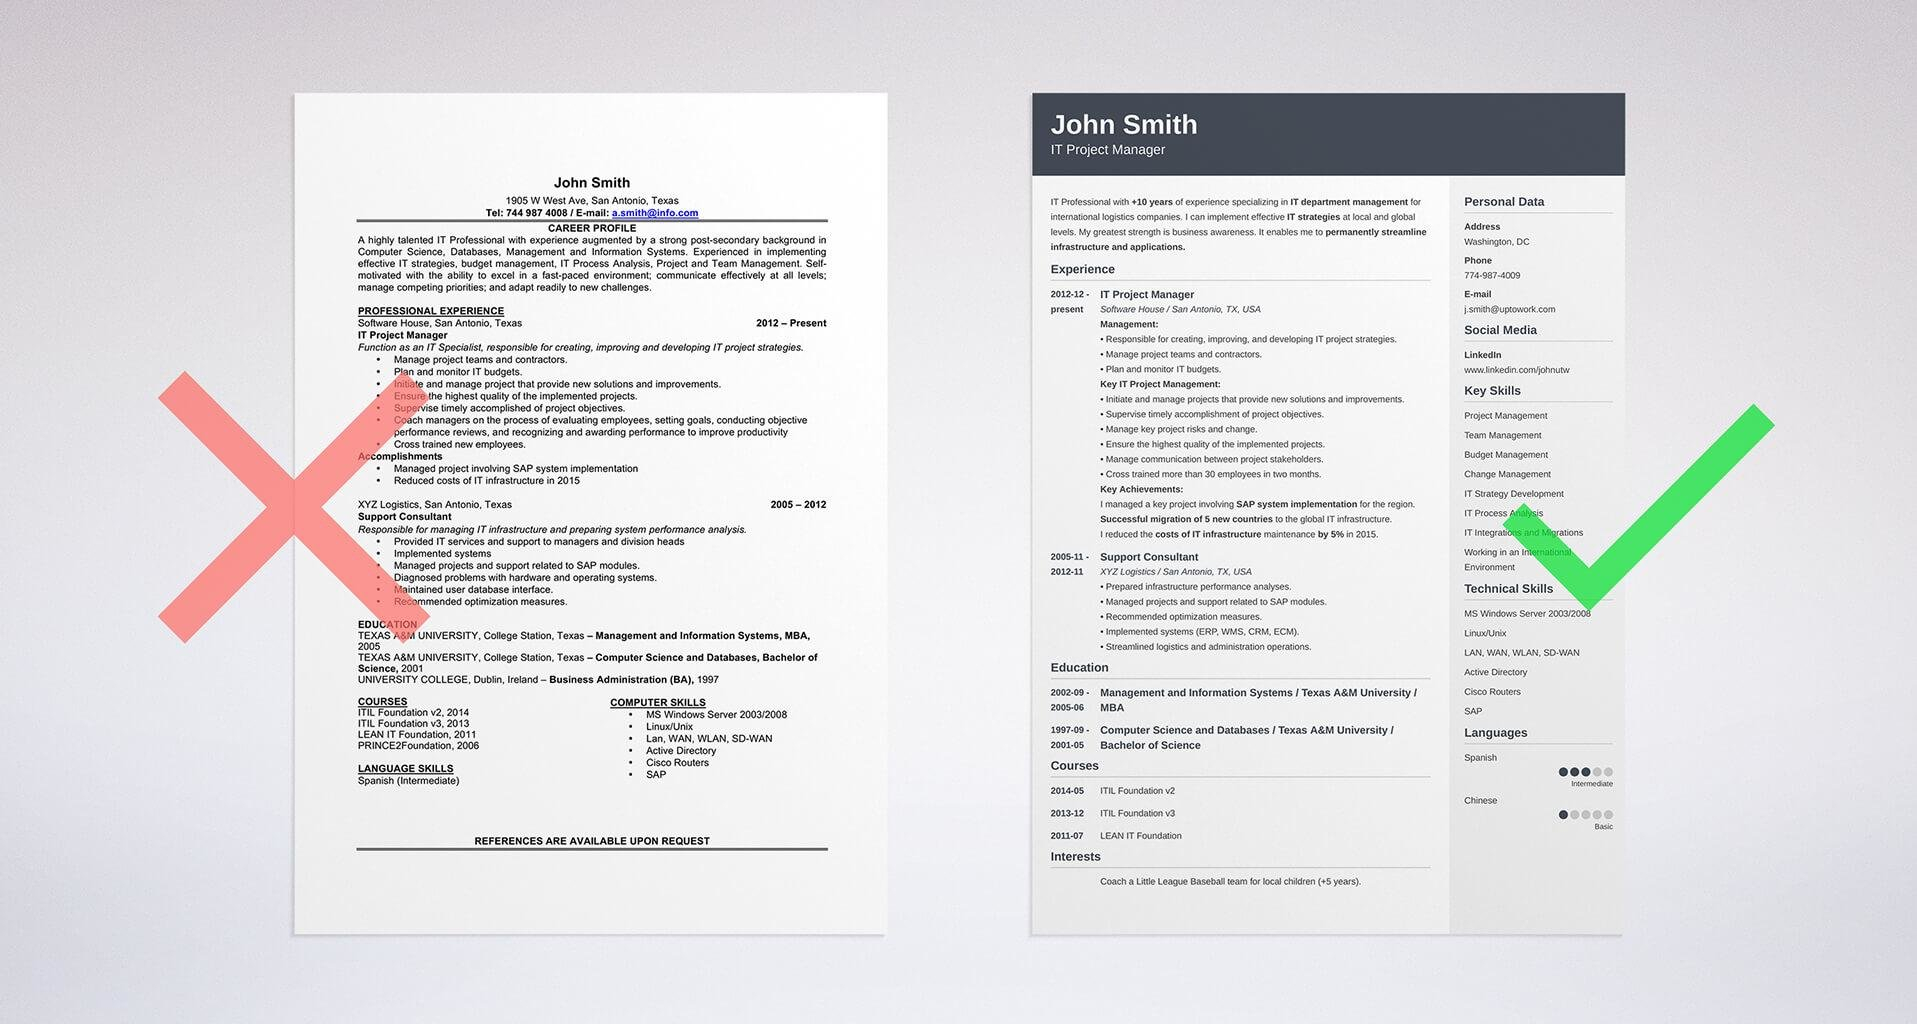 Best Resume Format 2020 Samples For All Types Of Resumes inside proportions 1917 X 1024